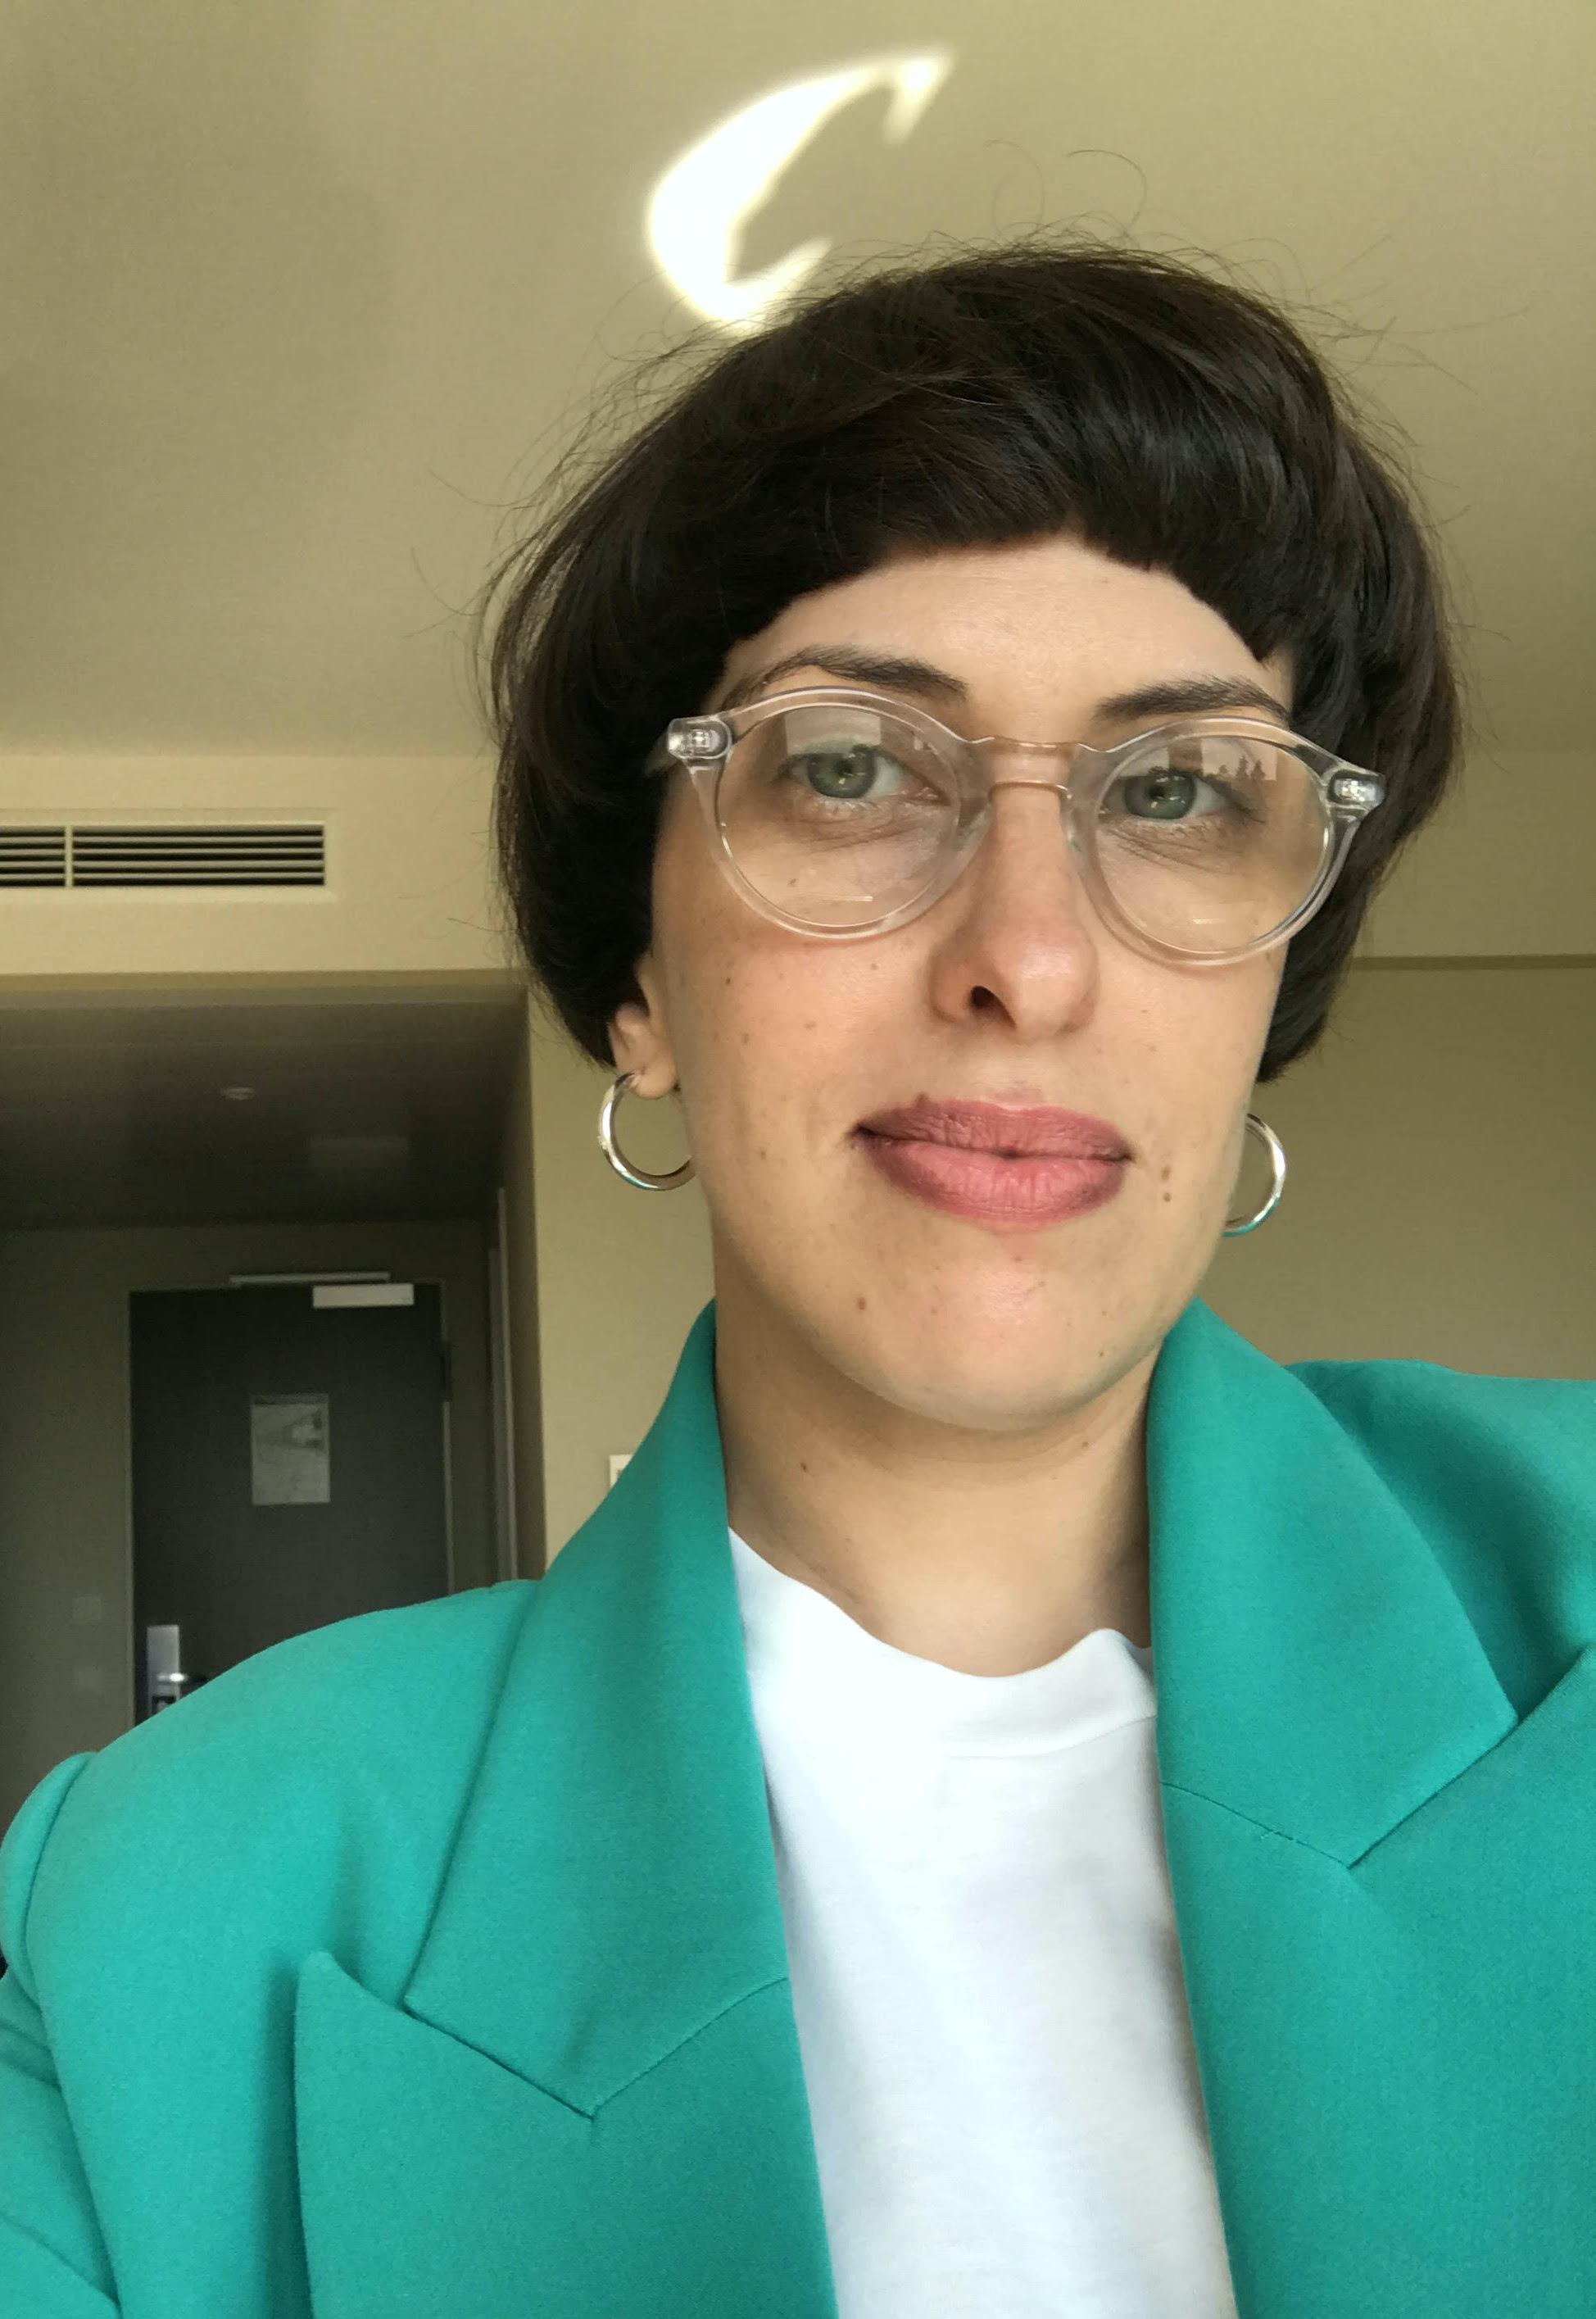 A light skinned person with short dark hair wearing glasses, a white shirt and a green jacket.